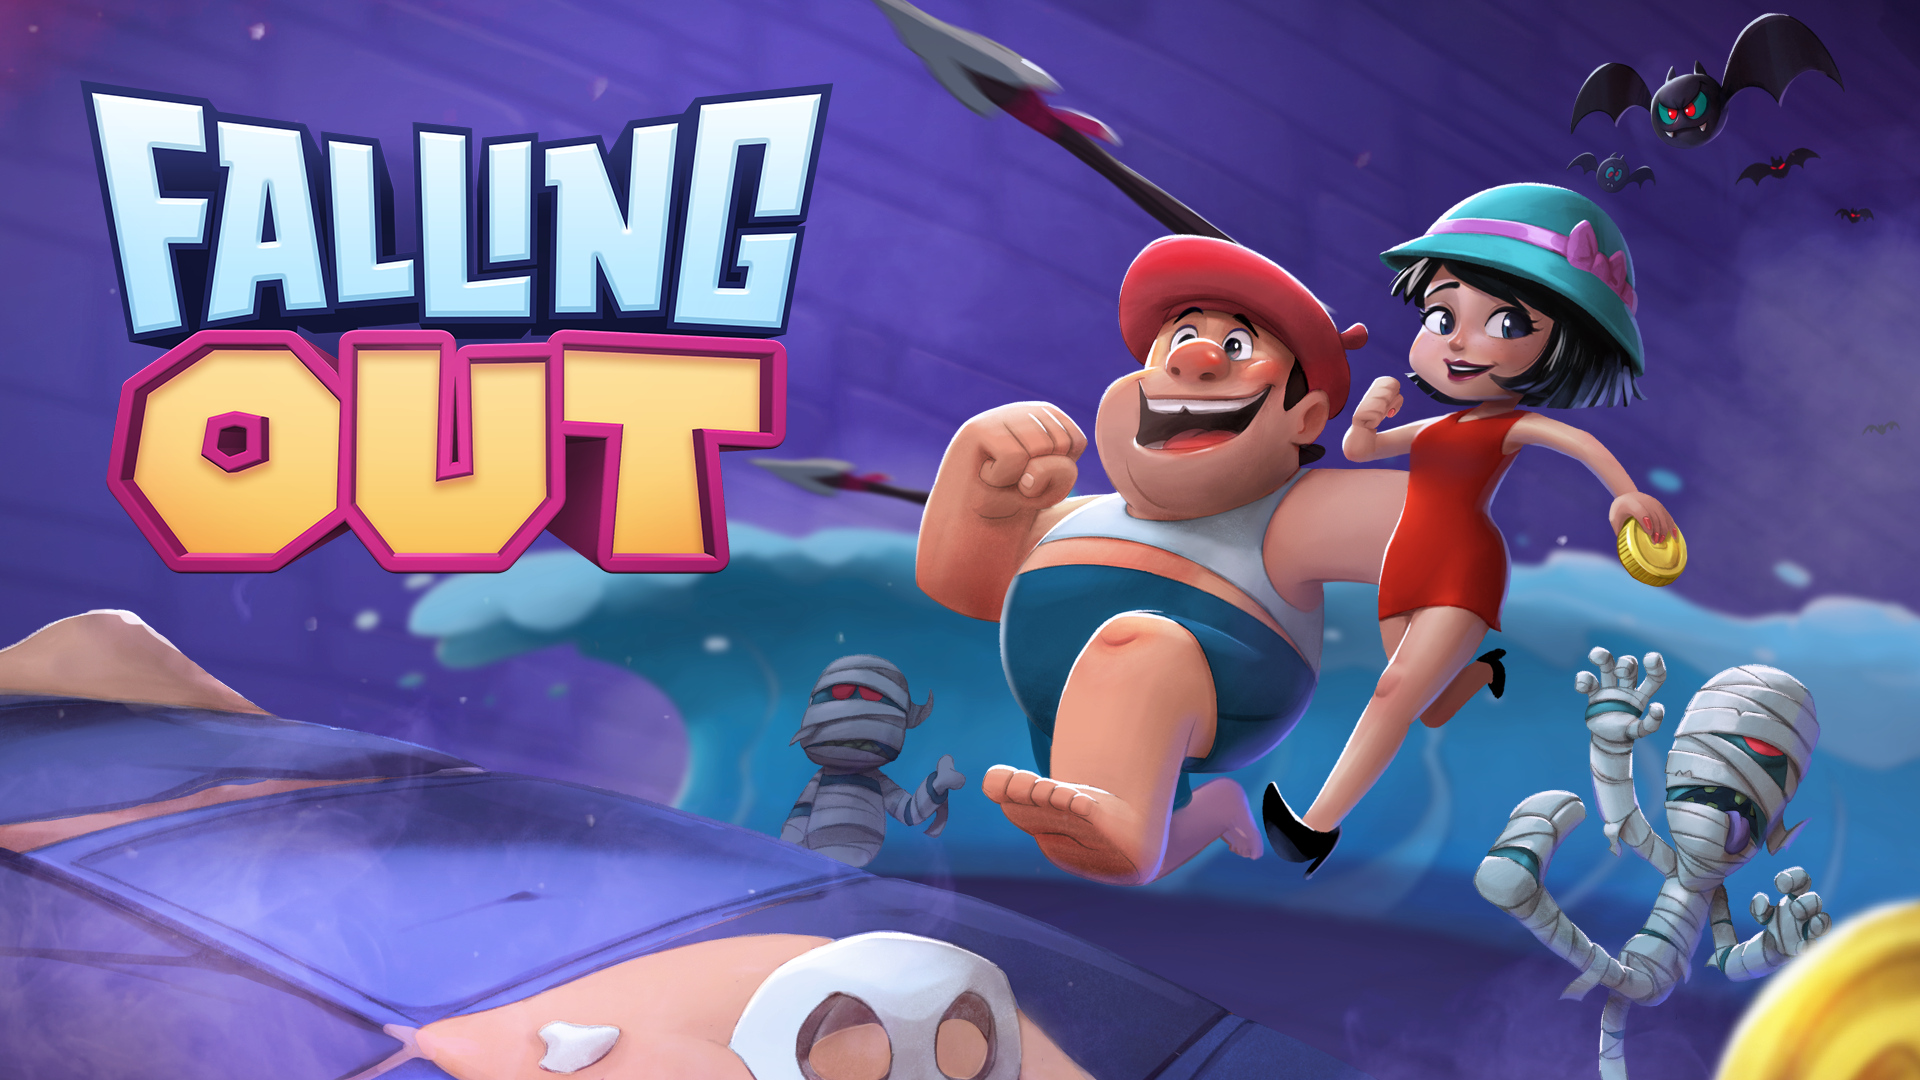 FALLING OUT PC Game Latest Version Free Download